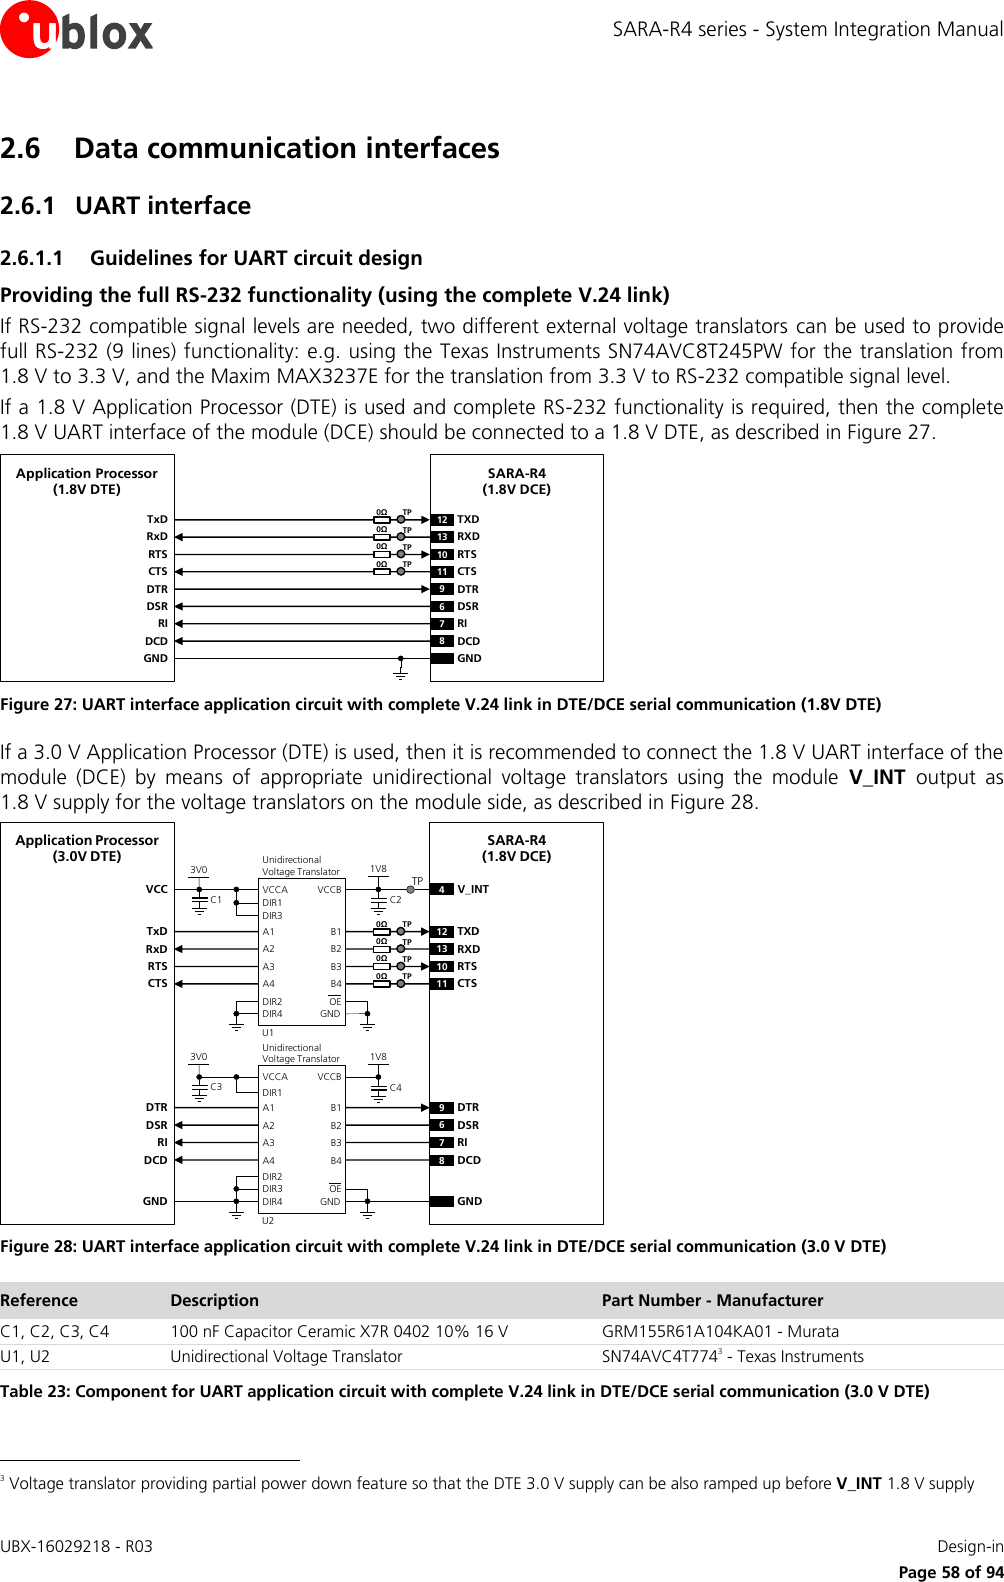 SARA-R4 series - System Integration Manual UBX-16029218 - R03    Design-in     Page 58 of 94 2.6 Data communication interfaces 2.6.1 UART interface 2.6.1.1 Guidelines for UART circuit design Providing the full RS-232 functionality (using the complete V.24 link) If RS-232 compatible signal levels are needed, two different external voltage translators  can be used to provide full RS-232 (9 lines) functionality: e.g. using the Texas Instruments SN74AVC8T245PW for the translation from 1.8 V to 3.3 V, and the Maxim MAX3237E for the translation from 3.3 V to RS-232 compatible signal level. If a 1.8 V Application Processor (DTE) is used and complete RS-232 functionality is required, then the complete 1.8 V UART interface of the module (DCE) should be connected to a 1.8 V DTE, as described in Figure 27. TxDApplication Processor(1.8V DTE)RxDRTSCTSDTRDSRRIDCDGNDSARA-R4(1.8V DCE)12 TXD9DTR13 RXD10 RTS11 CTS6DSR7RI8DCDGND0ΩTP0ΩTP0ΩTP0ΩTP  Figure 27: UART interface application circuit with complete V.24 link in DTE/DCE serial communication (1.8V DTE) If a 3.0 V Application Processor (DTE) is used, then it is recommended to connect the 1.8 V UART interface of the module  (DCE)  by  means  of  appropriate  unidirectional  voltage  translators  using  the  module  V_INT  output  as 1.8 V supply for the voltage translators on the module side, as described in Figure 28. 4V_INTTxDApplication Processor(3.0V DTE)RxDRTSCTSDTRDSRRIDCDGNDSARA-R4(1.8V DCE)12 TXD9DTR13 RXD10 RTS11 CTS6DSR7RI8DCDGND1V8B1 A1GNDU1B3A3VCCBVCCAUnidirectionalVoltage TranslatorC1 C23V0DIR3DIR2 OEDIR1VCCB2 A2B4A4DIR41V8B1 A1GNDU2B3A3VCCBVCCAUnidirectionalVoltage TranslatorC3 C43V0DIR1DIR3 OEB2 A2B4A4DIR4DIR2TP0ΩTP0ΩTP0ΩTP0ΩTP Figure 28: UART interface application circuit with complete V.24 link in DTE/DCE serial communication (3.0 V DTE) Reference Description Part Number - Manufacturer C1, C2, C3, C4 100 nF Capacitor Ceramic X7R 0402 10% 16 V GRM155R61A104KA01 - Murata U1, U2 Unidirectional Voltage Translator SN74AVC4T7743 - Texas Instruments Table 23: Component for UART application circuit with complete V.24 link in DTE/DCE serial communication (3.0 V DTE)                                                        3 Voltage translator providing partial power down feature so that the DTE 3.0 V supply can be also ramped up before V_INT 1.8 V supply 